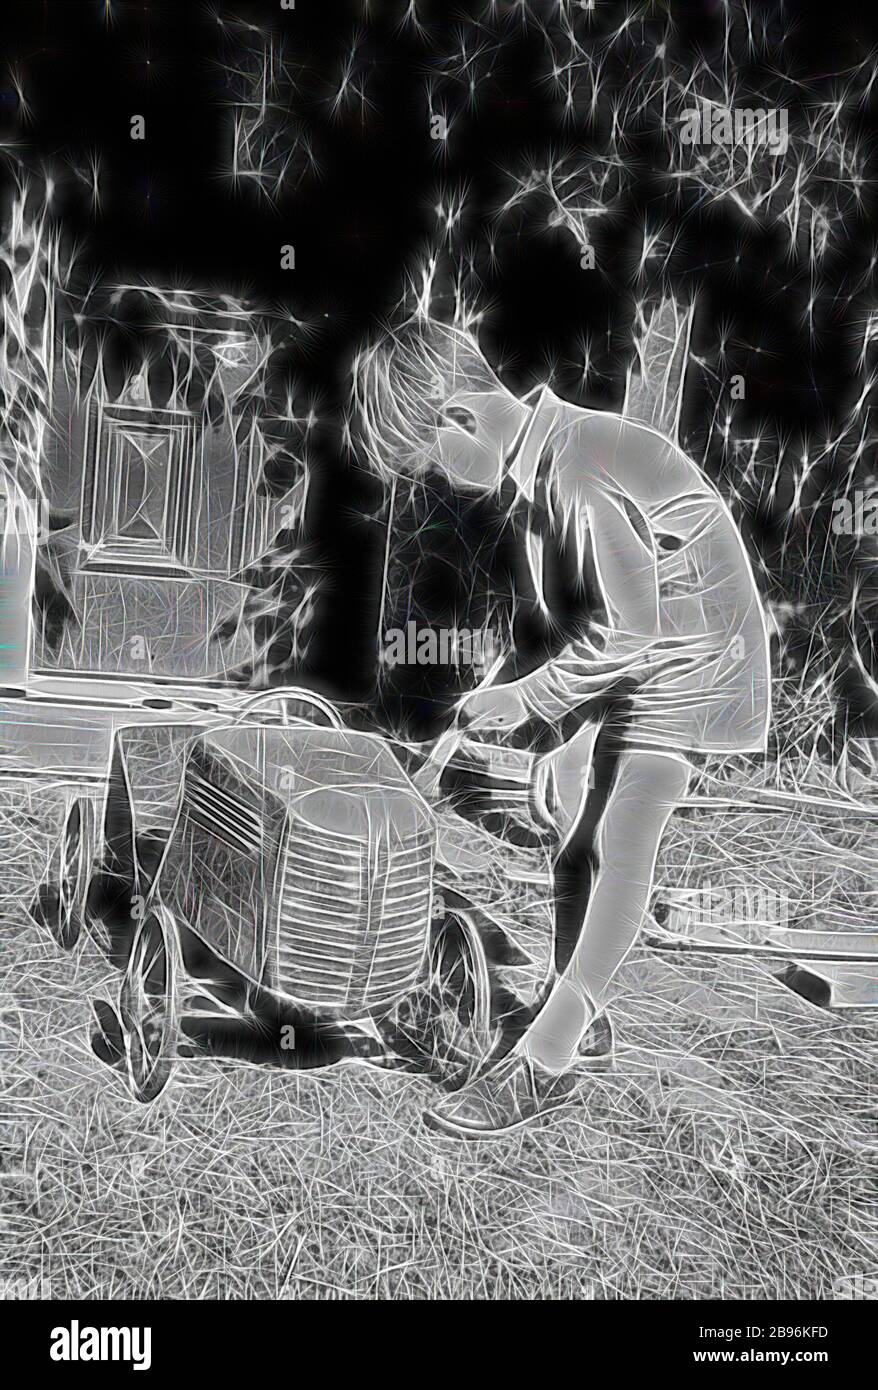 Negative - Greensborough, Victoria, 1959, A boy painting a pedal car., Reimagined by Gibon, design of warm cheerful glowing of brightness and light rays radiance. Classic art reinvented with a modern twist. Photography inspired by futurism, embracing dynamic energy of modern technology, movement, speed and revolutionize culture. Stock Photo